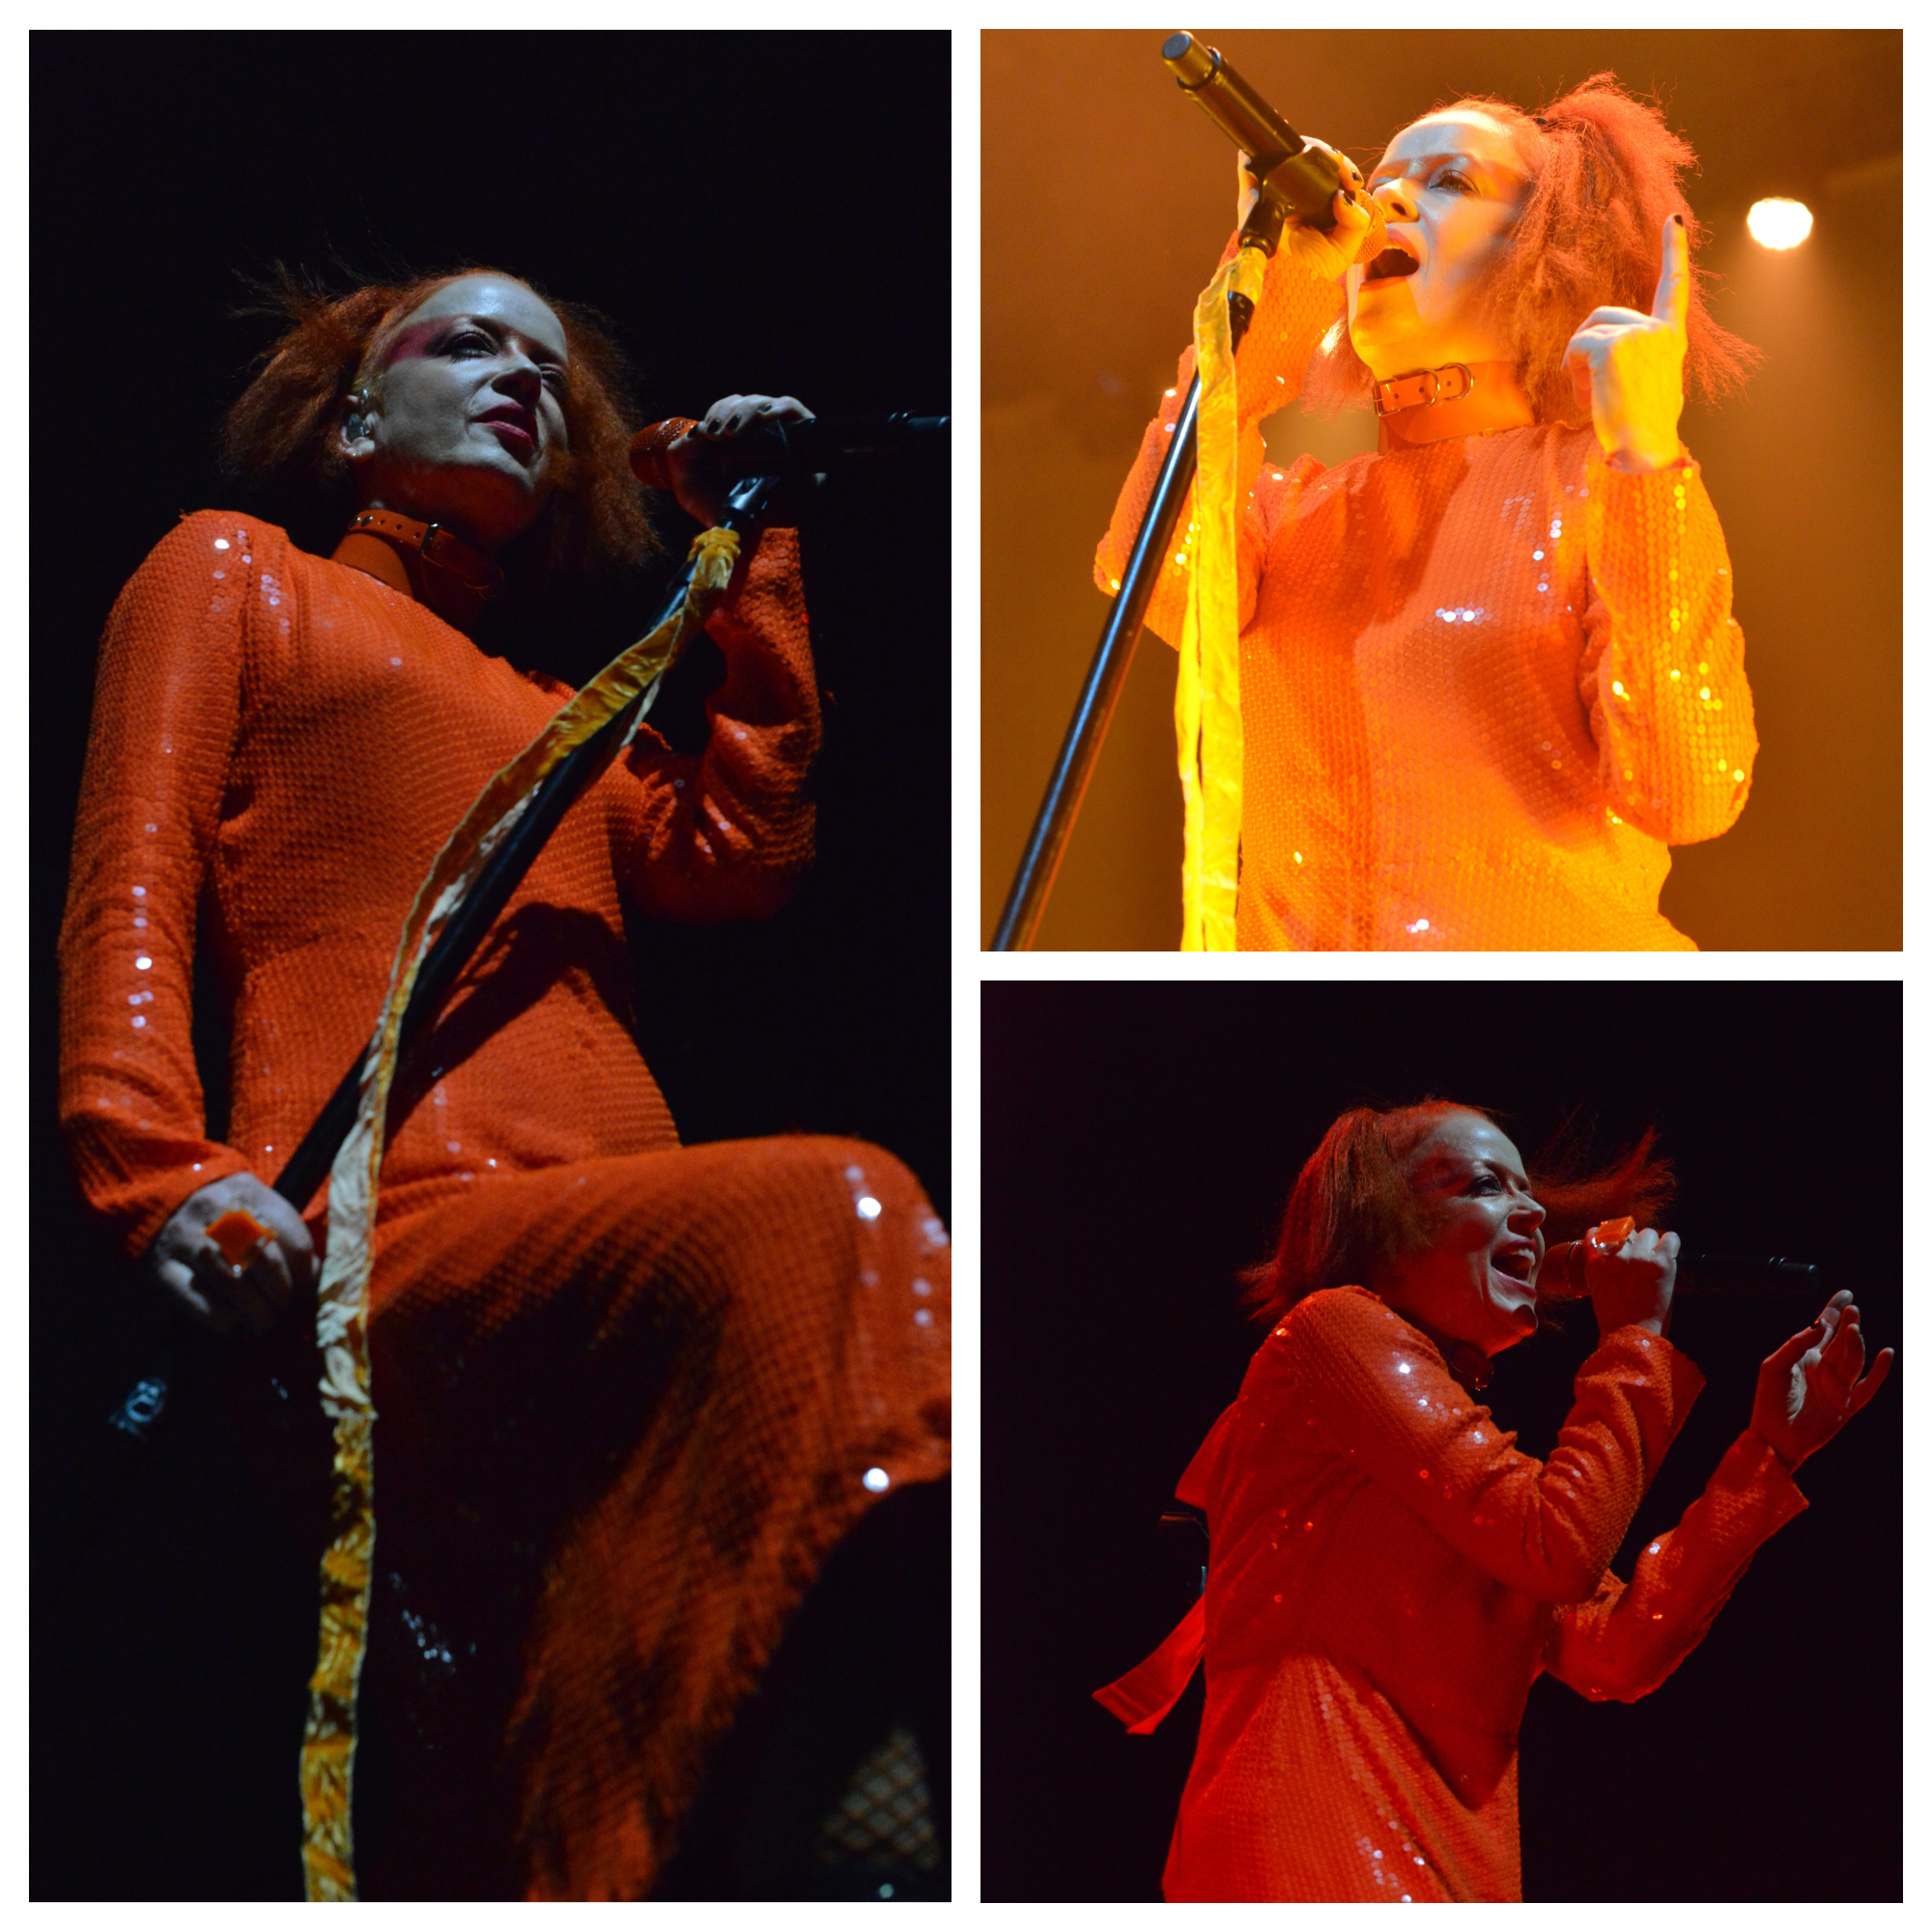 Shirley Manson of Garbage - photo by Russell Kershaw